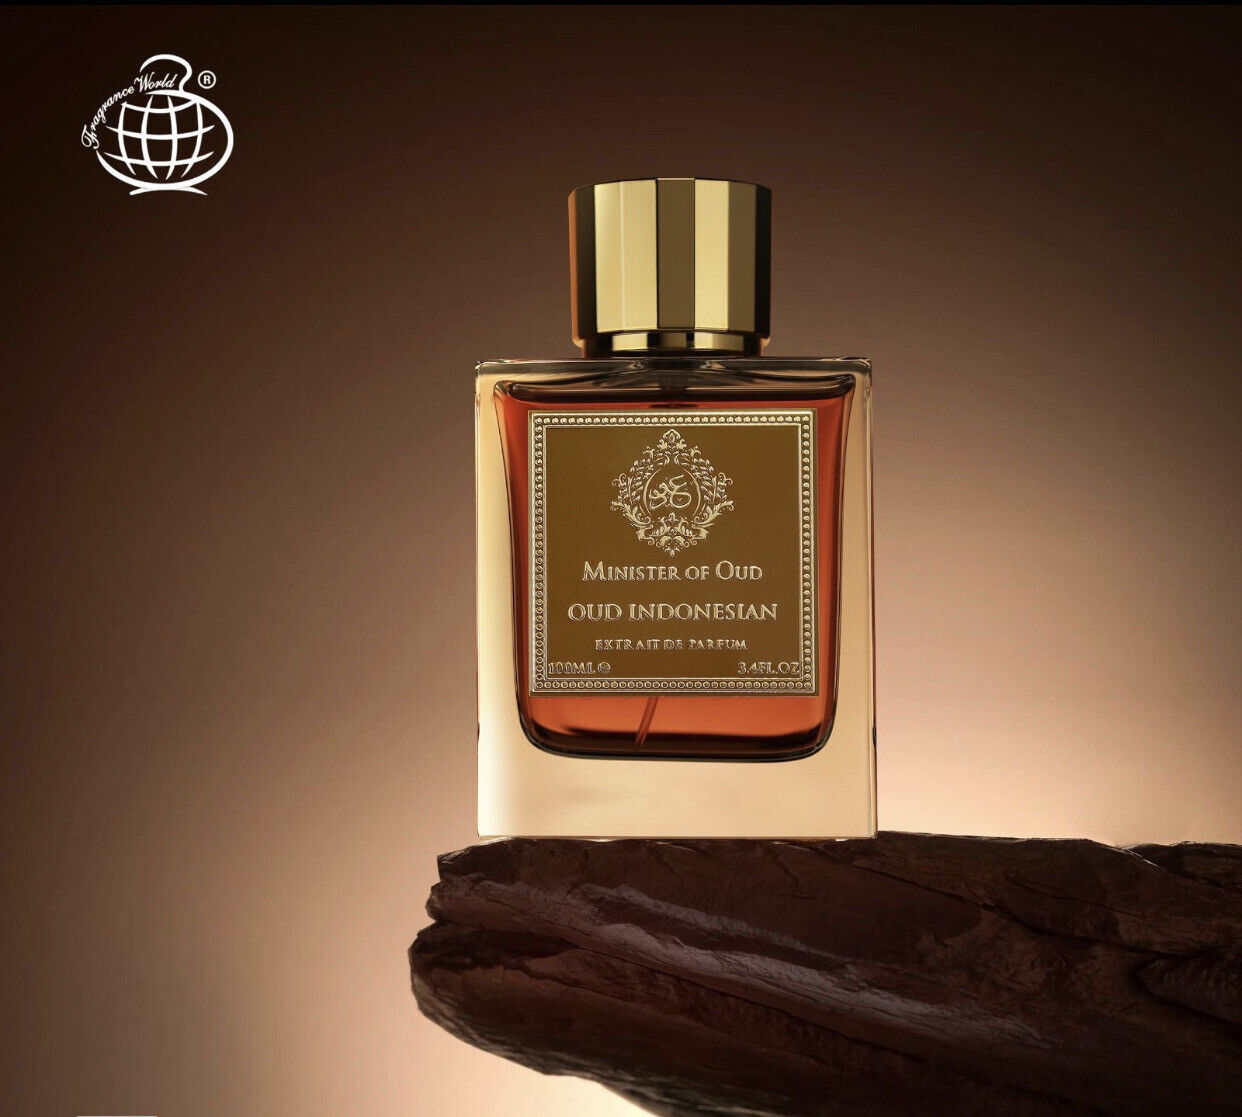 Minister of Oud OUD Indonesian Edp 100 Ml By Fragrance World - Newest